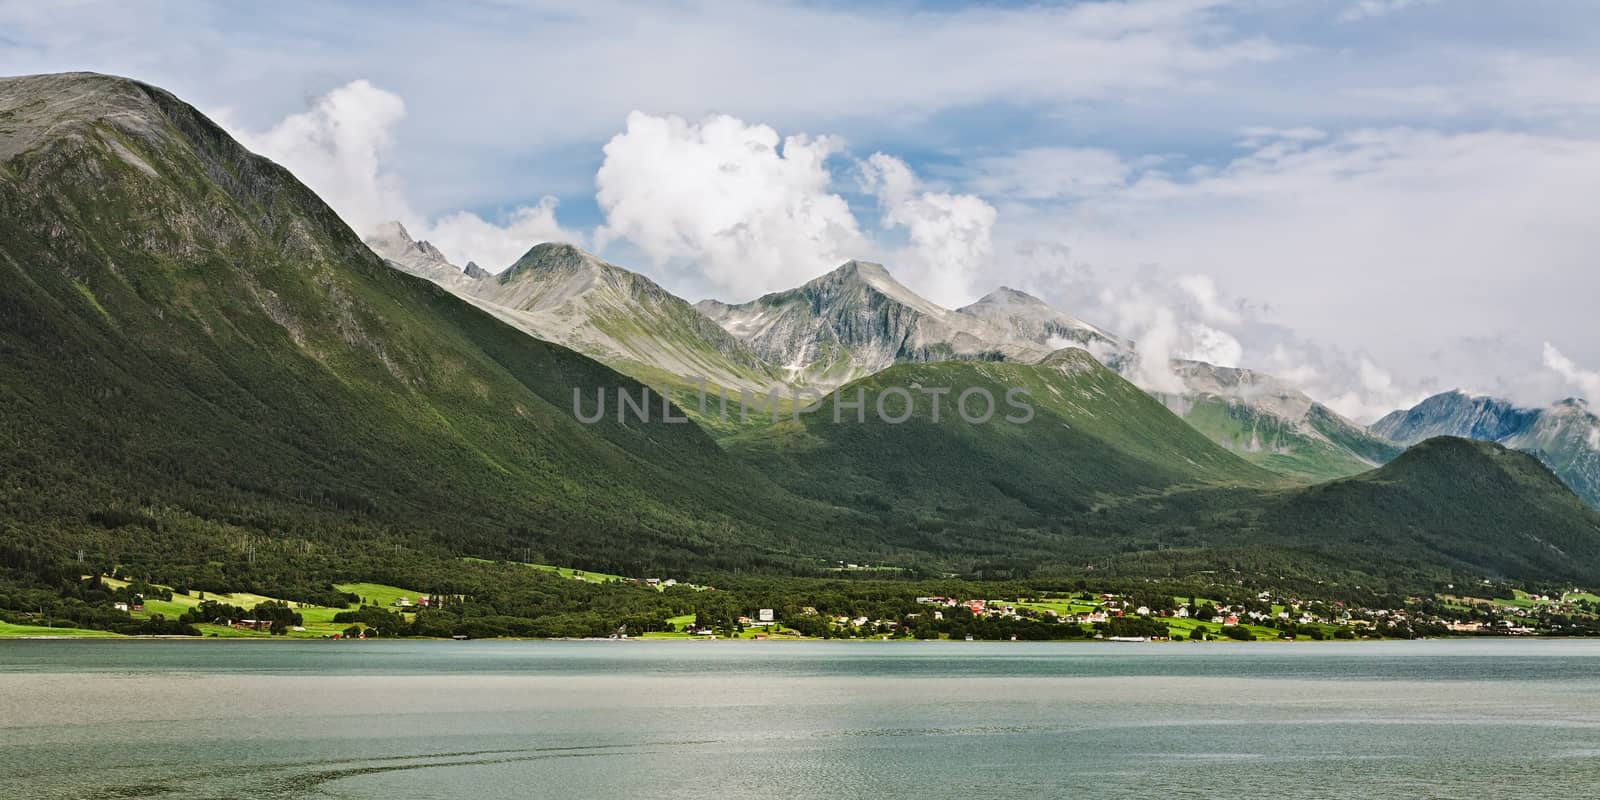 Panoramic view of the mountains along the Romsdalsfjorden in Norway under a sunny sky